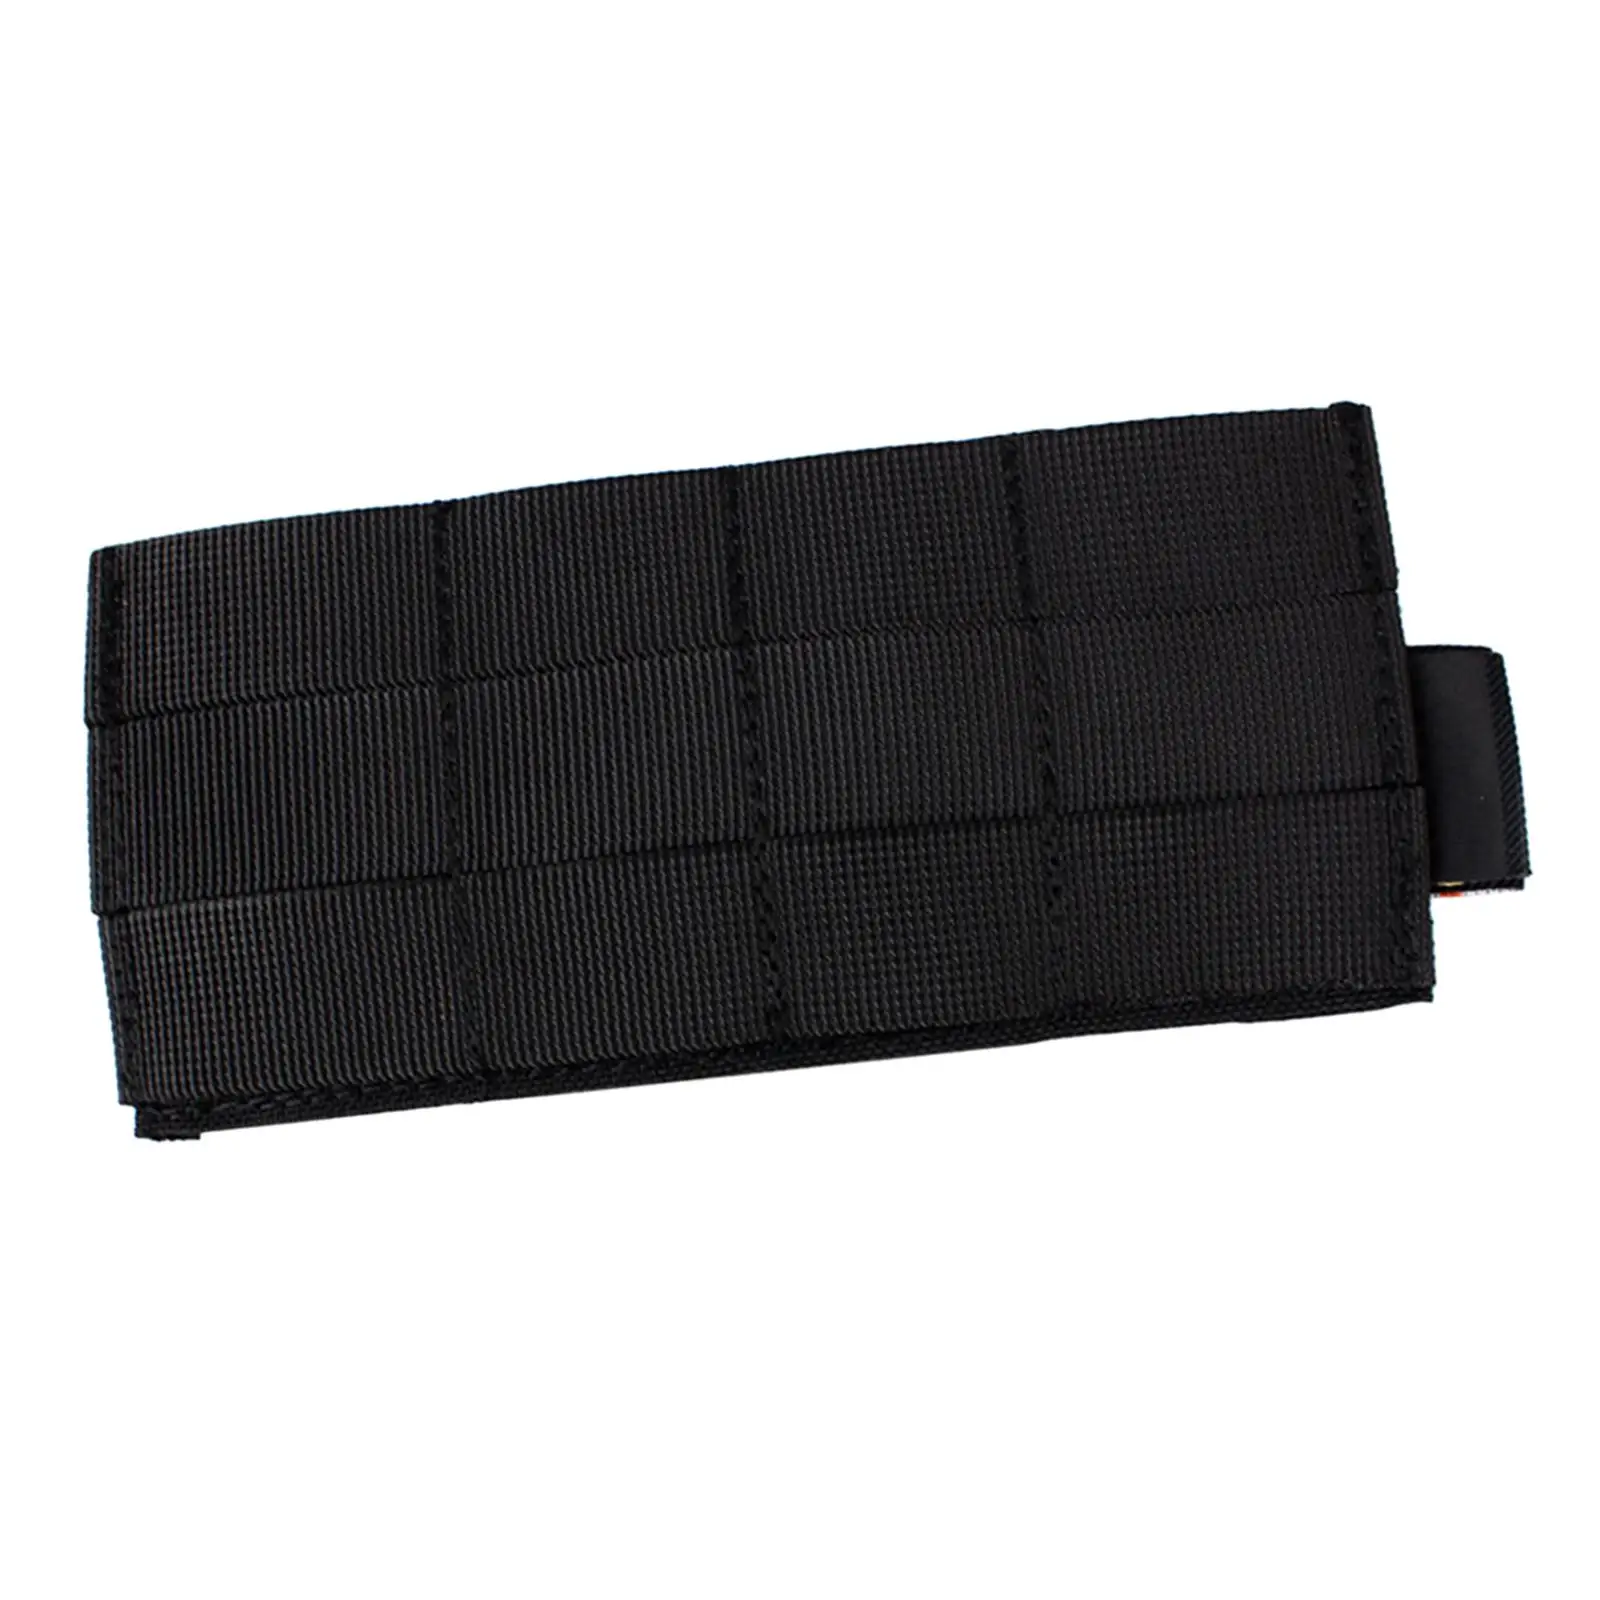 Belt Adapter Panel for  Pouches Insert System Heavy Duty Detatchable